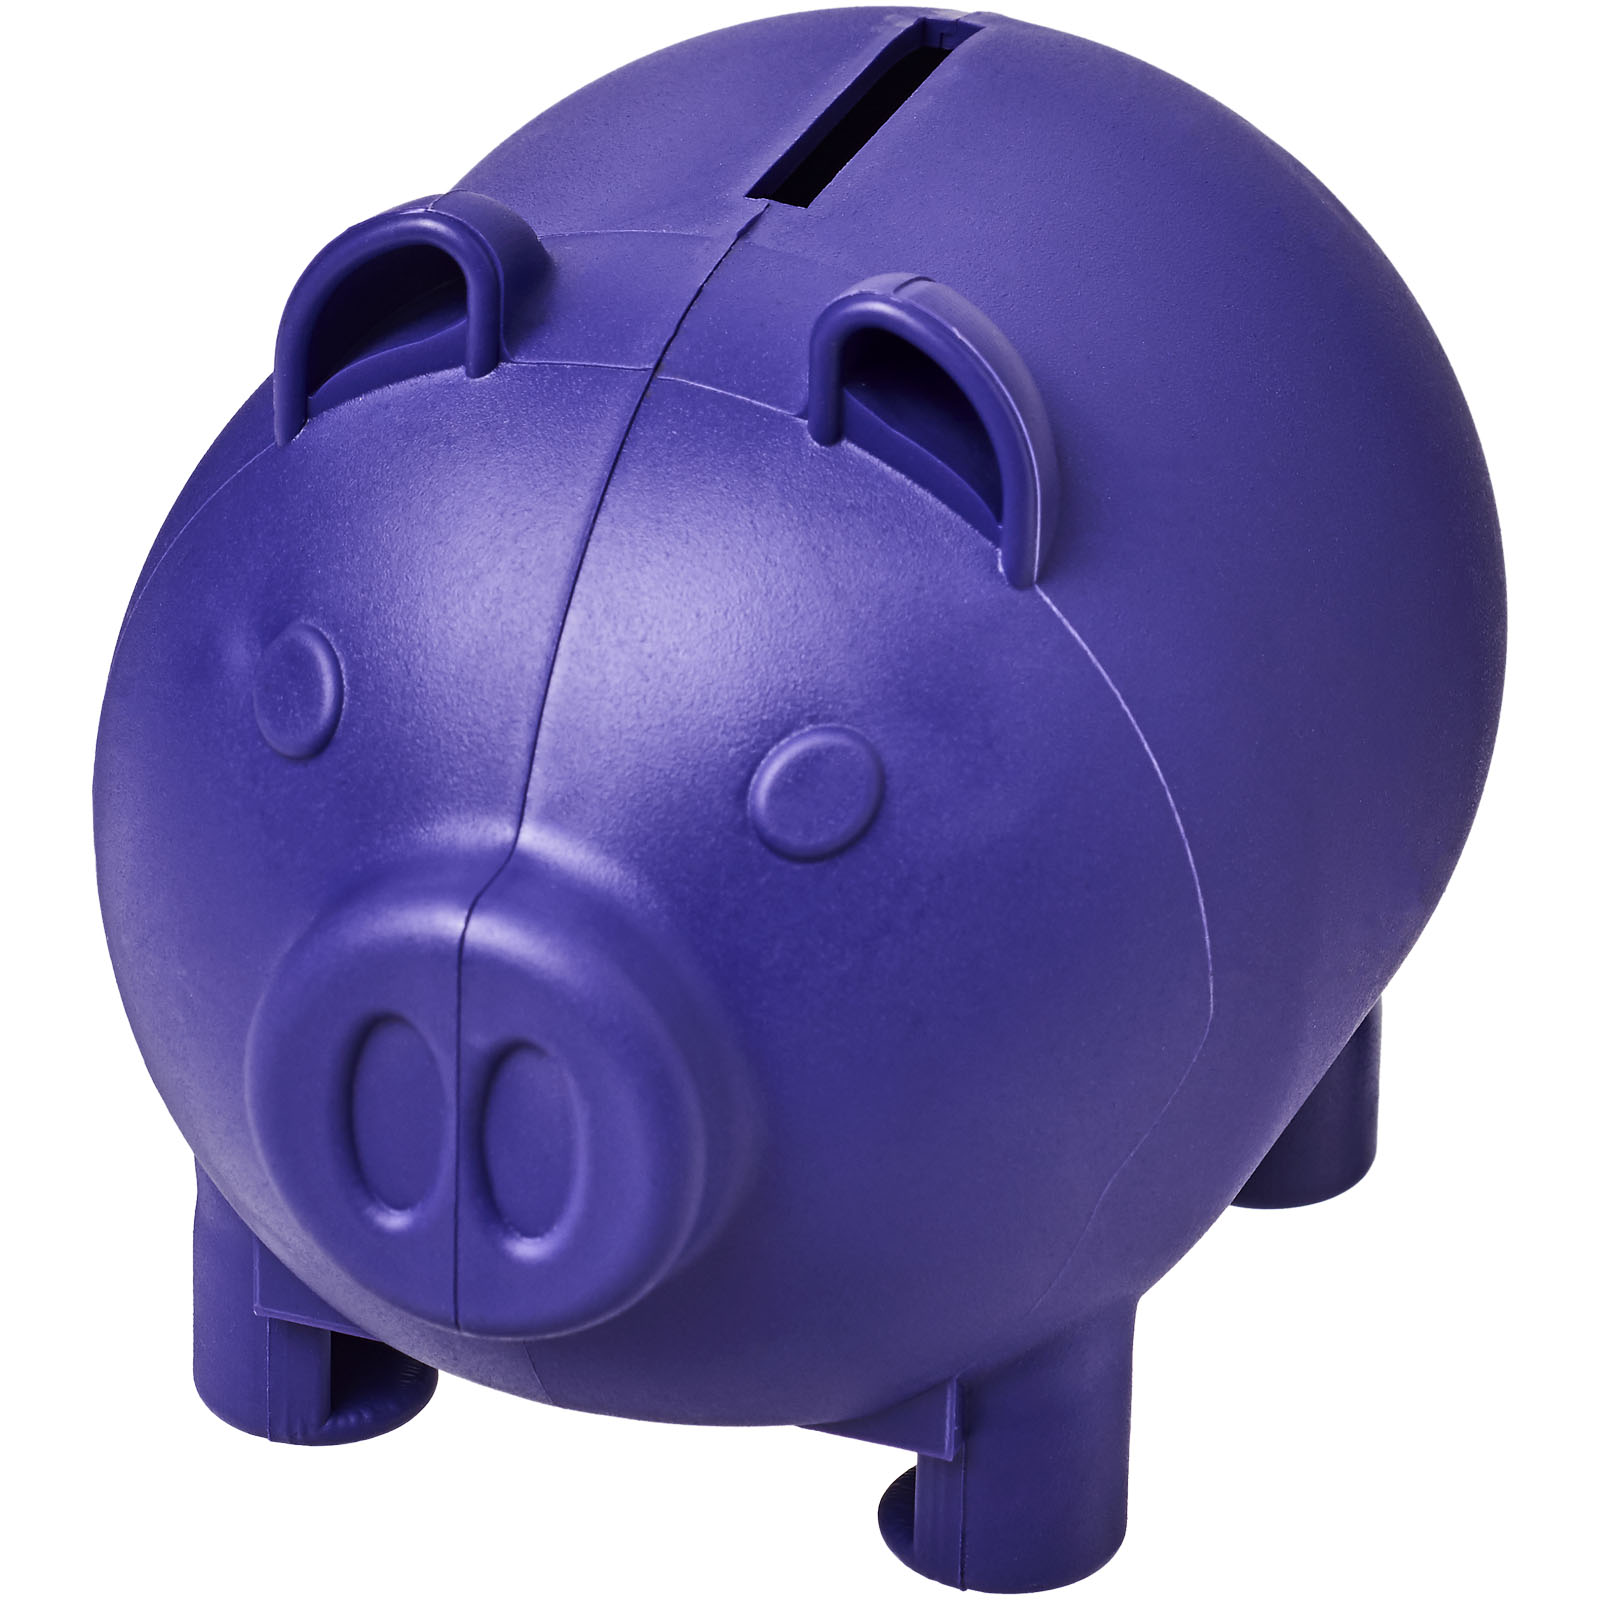 Home Accessories - Oink small piggy bank